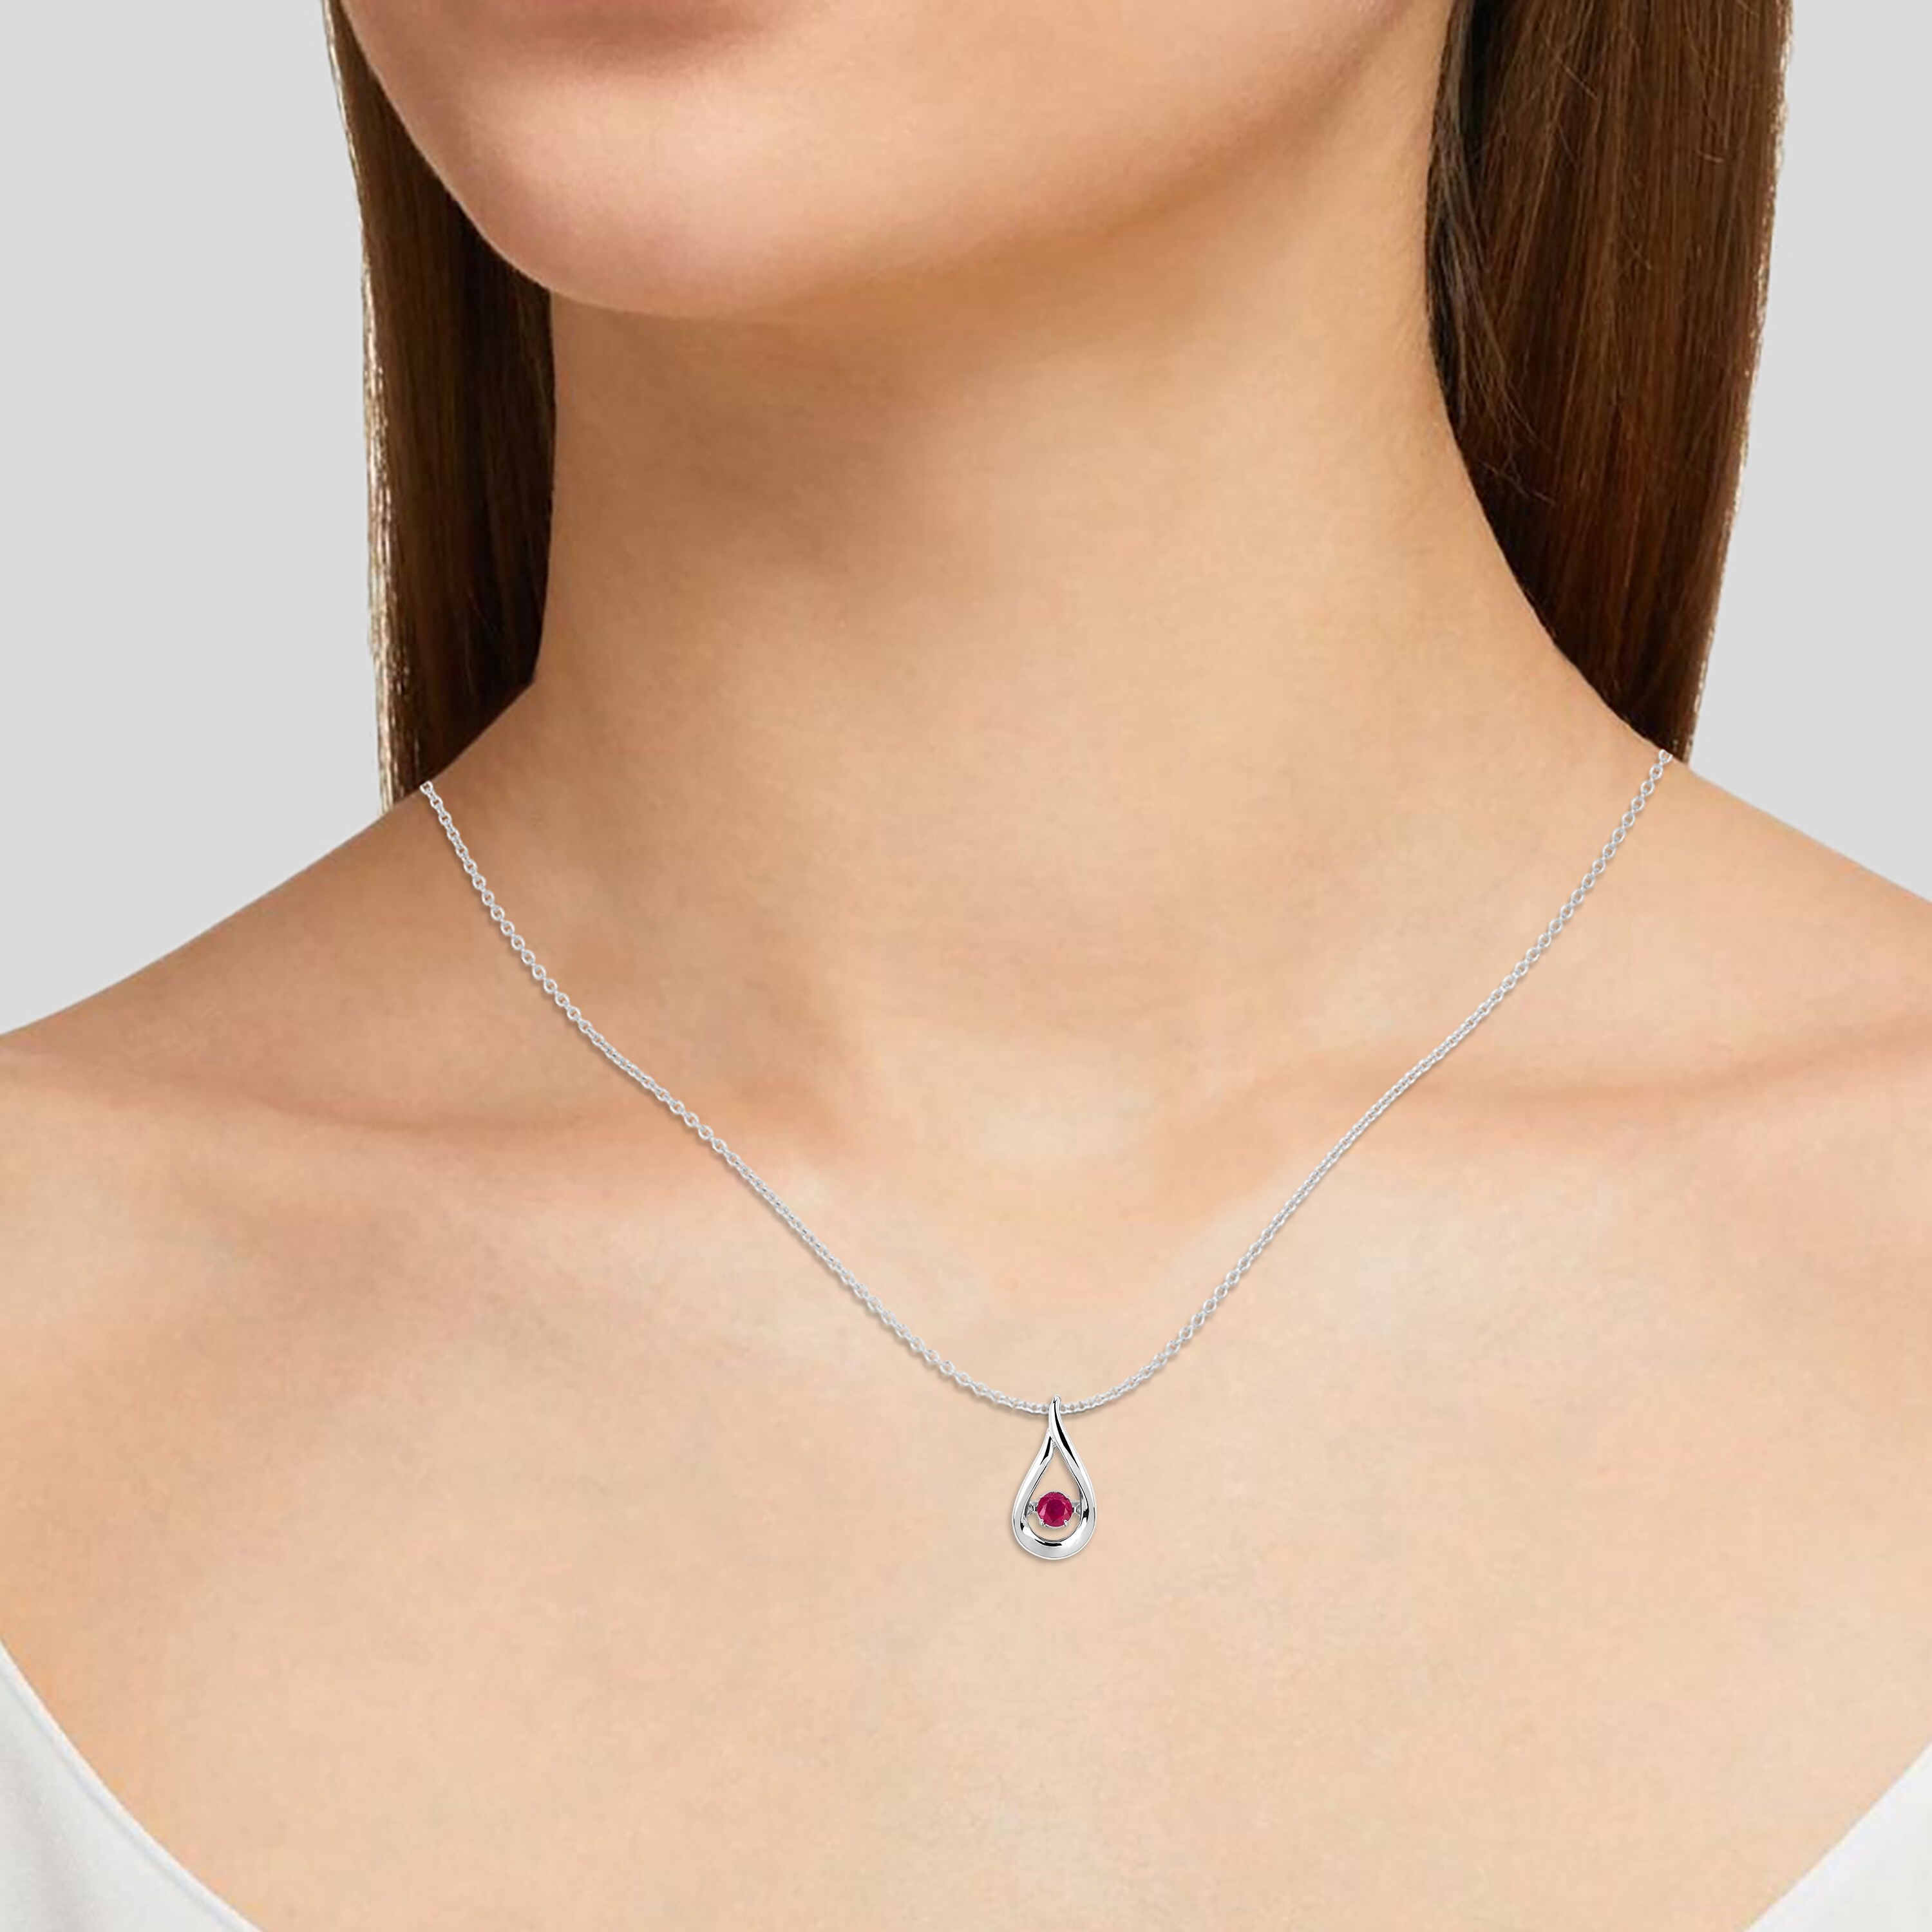 Choice of Birthstone Months/Colors .925 Sterling Silver Dancing Genuine Gemstone Teardrop Pendant Necklace 18 Chain 